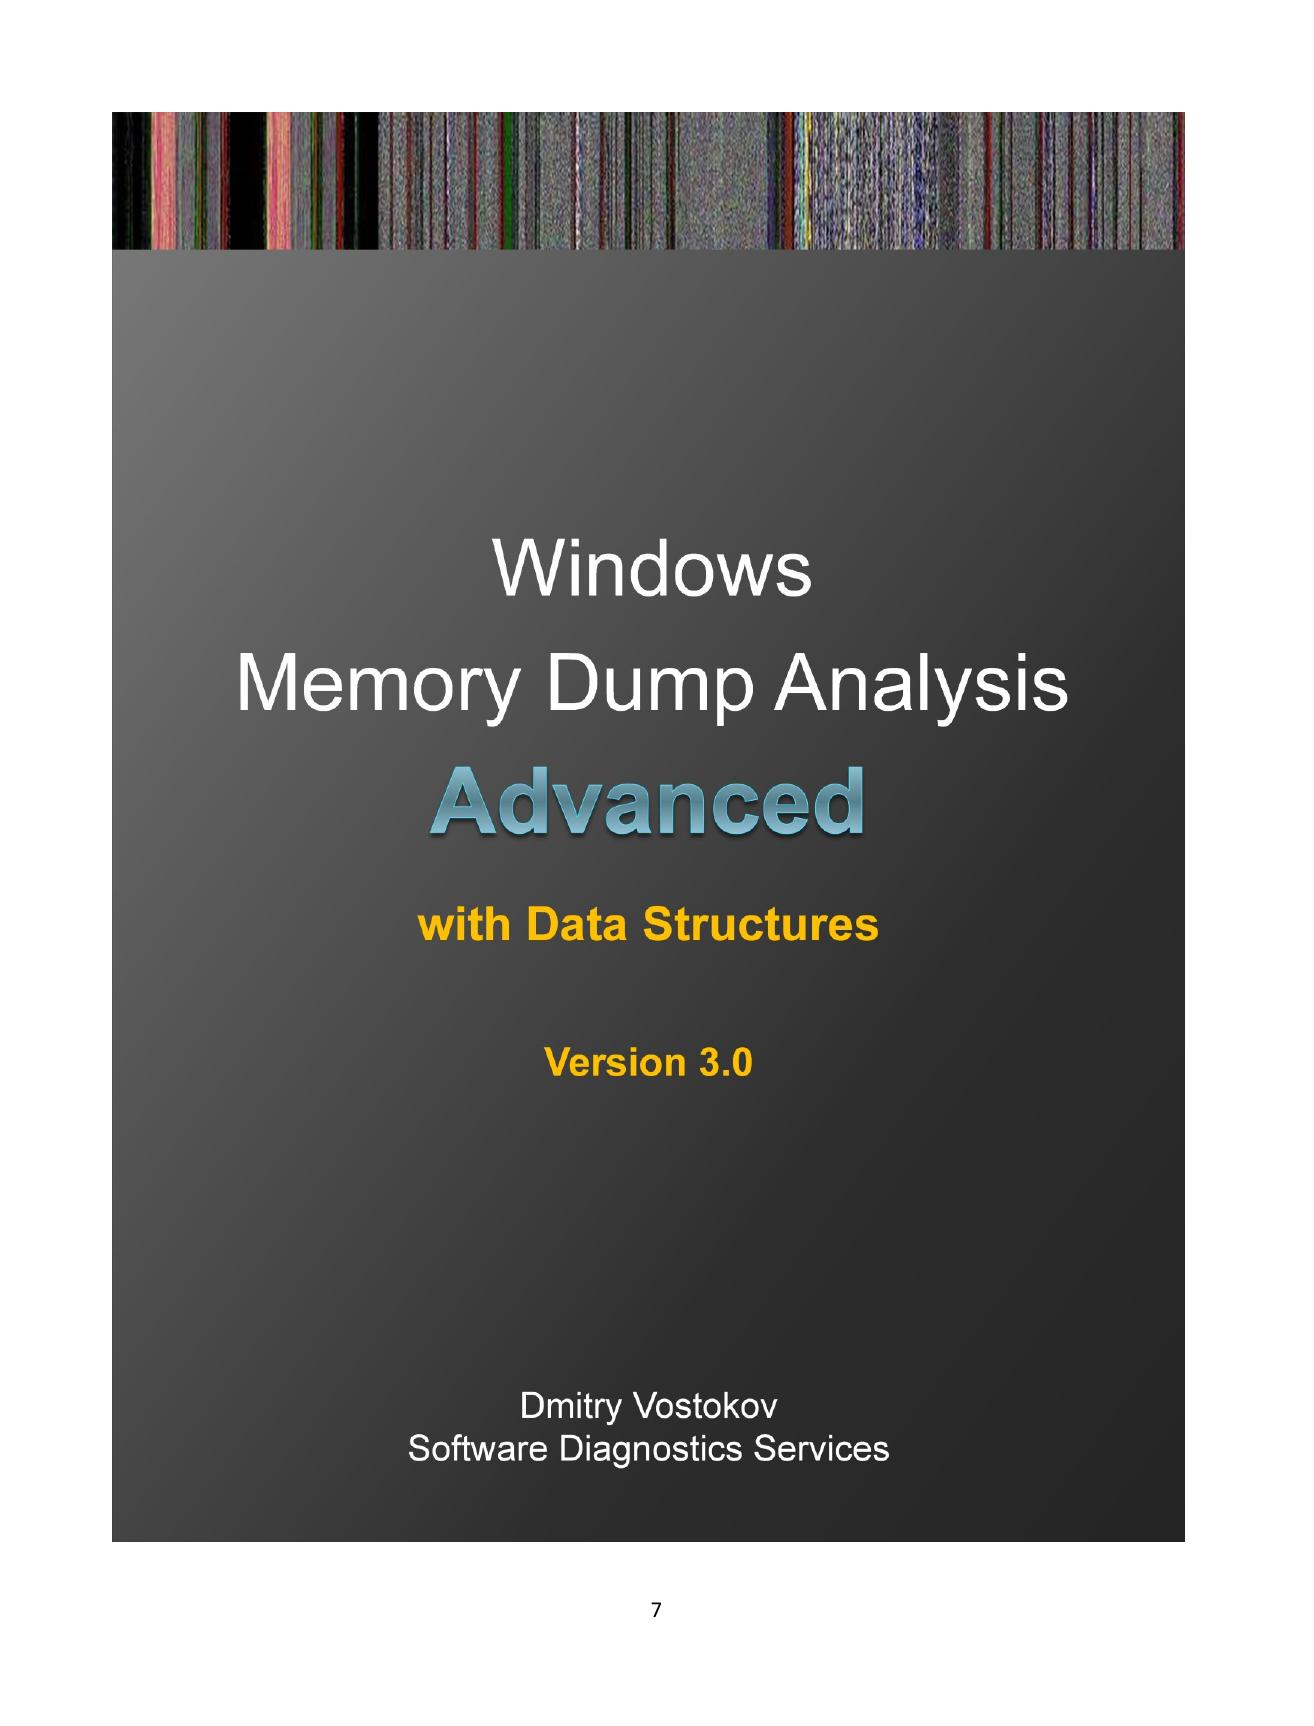 Advanced Windows Memory Dump Analysis with Data Structures: Training Course Transcript and WinDbg Practice Exercises with Notes, Third Edition